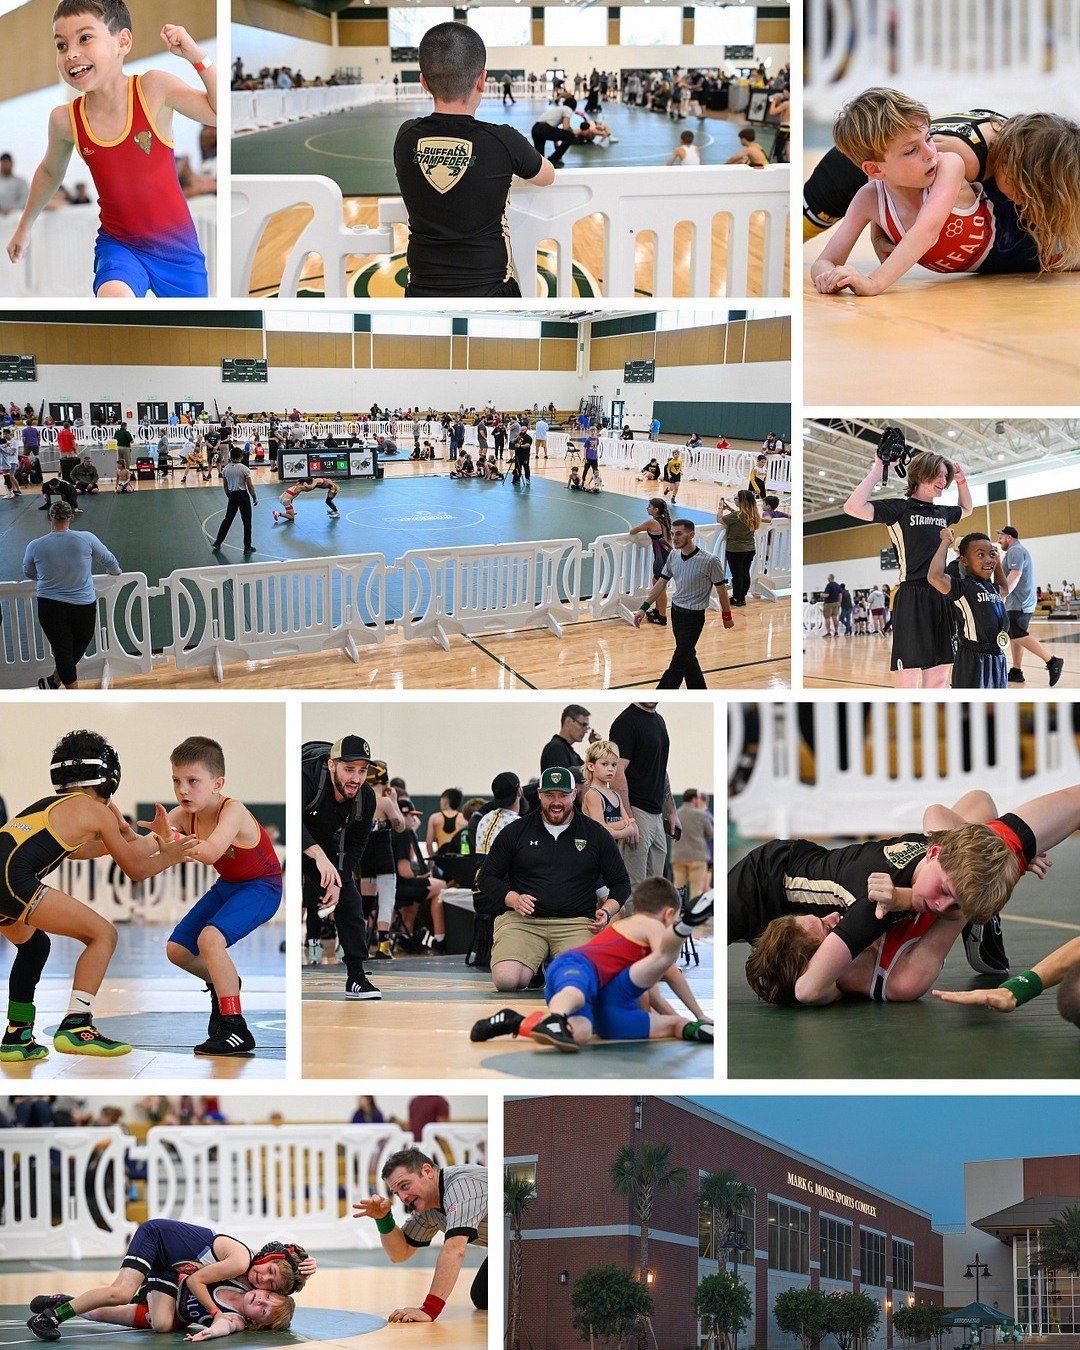 The Buffalo Stampeders and The Villages High School hosted the first ever Buffalo IOF Youth Wrestling event today at the Mark G. Morse Sports Complex. Looking forward to hosting the AAU State Tournament next weekend!